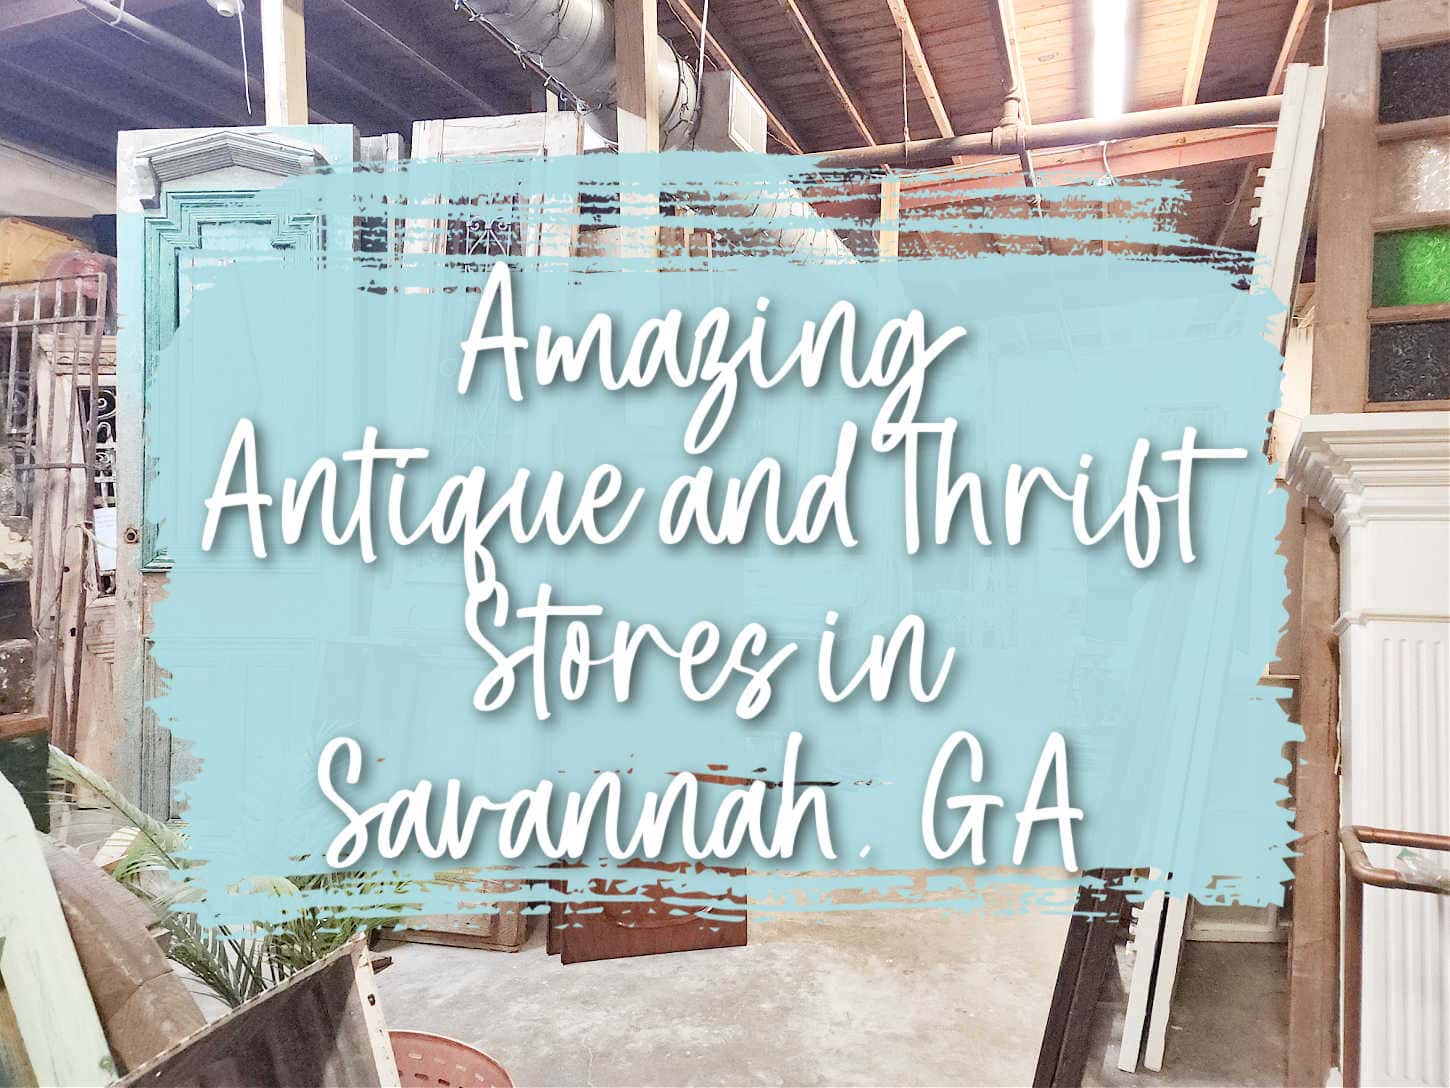 Antique and Thrift Stores in Savannah, GA